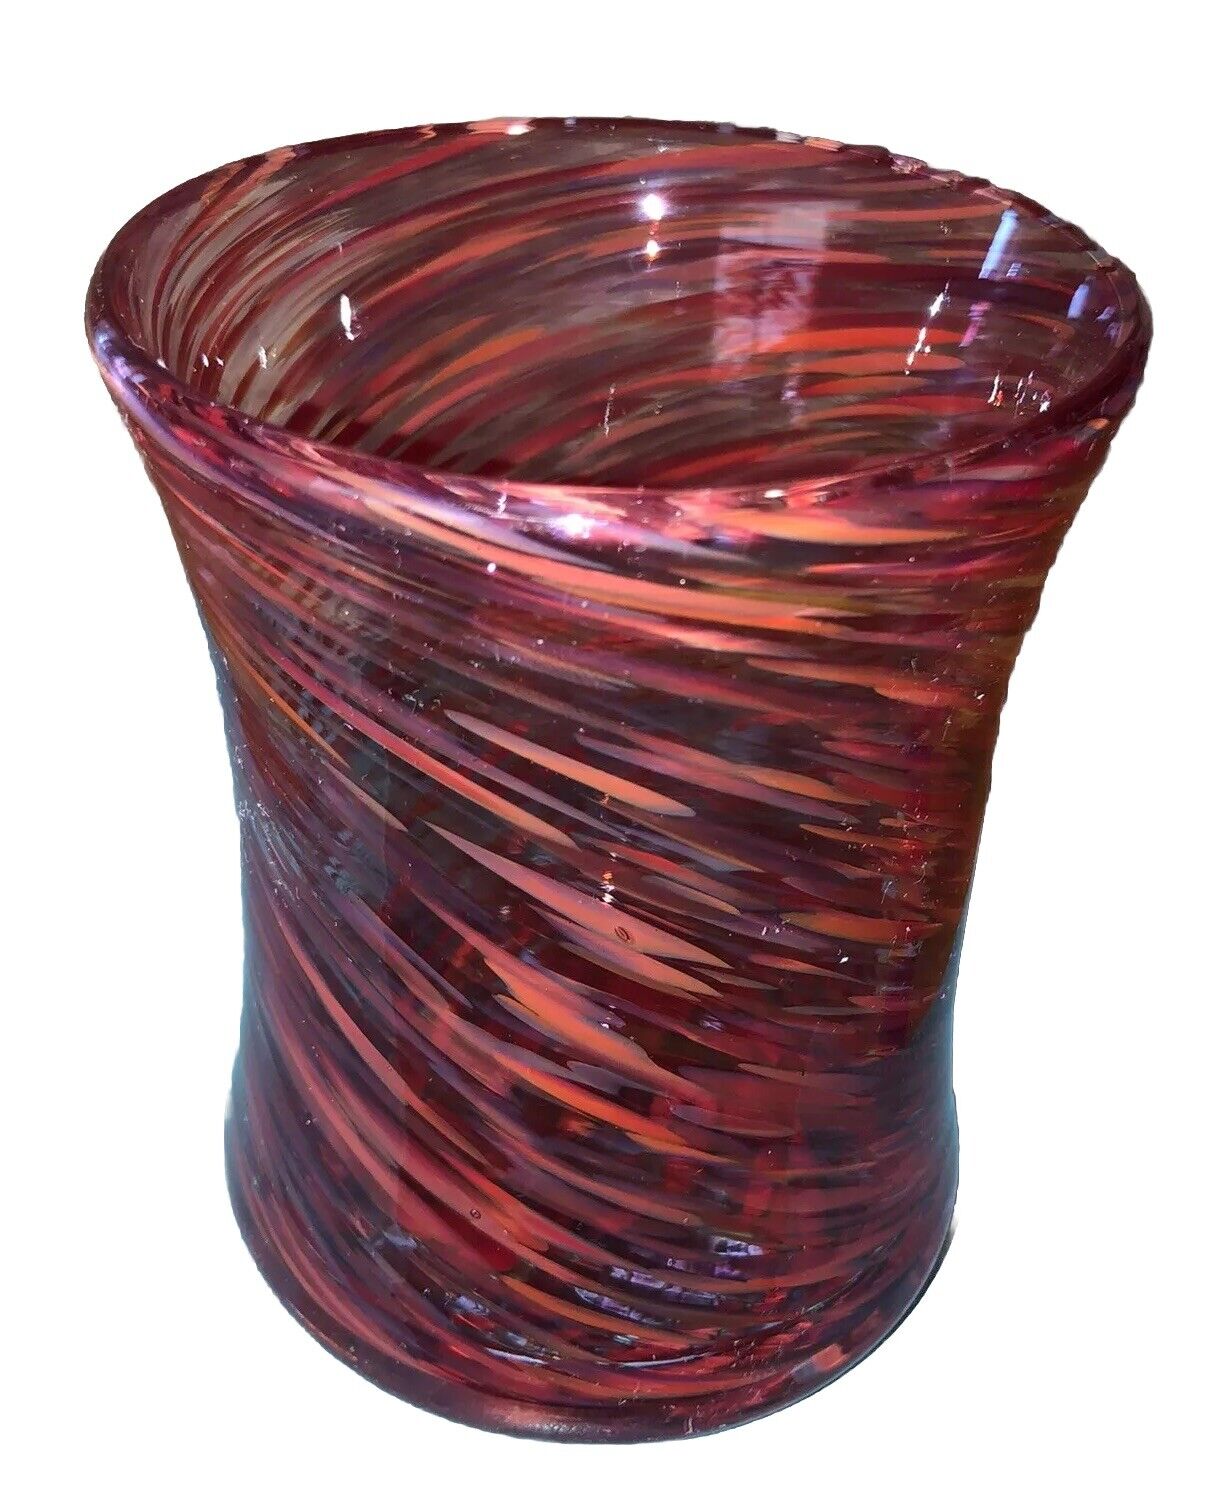 Beautiful Red Swirl Vintage Art Glass Vase/Container ￼ Nice